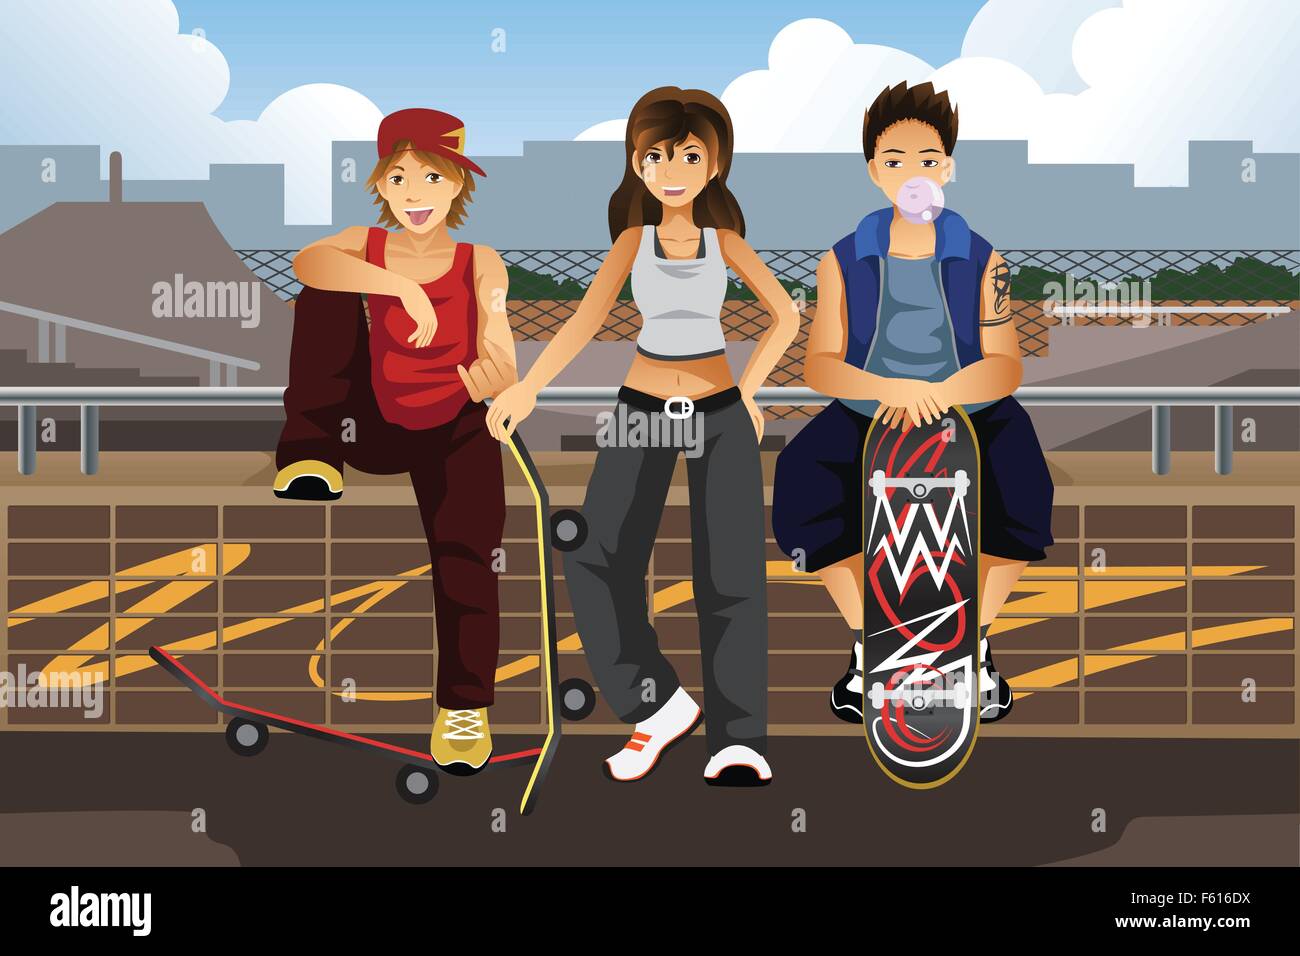 A vector illustration of young people hanging out outside with skateboard Stock Vector